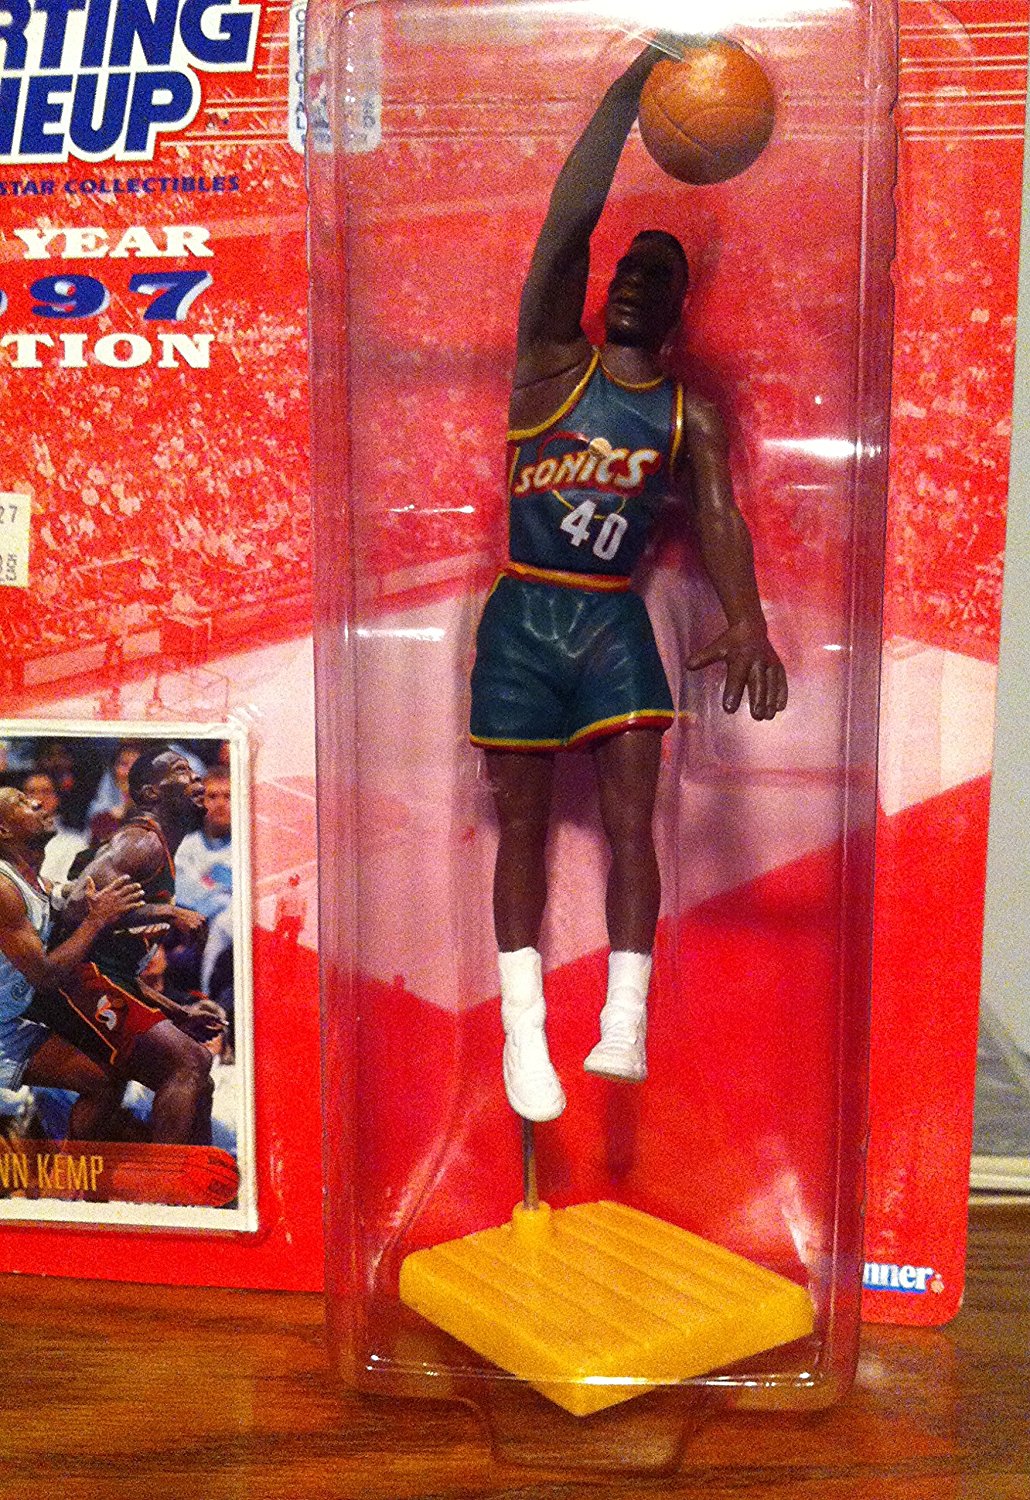 1997 Shawn Kemp / Seattle Supersonics NBA Starting Lineup and Exclusive NBA Collector Trading Card